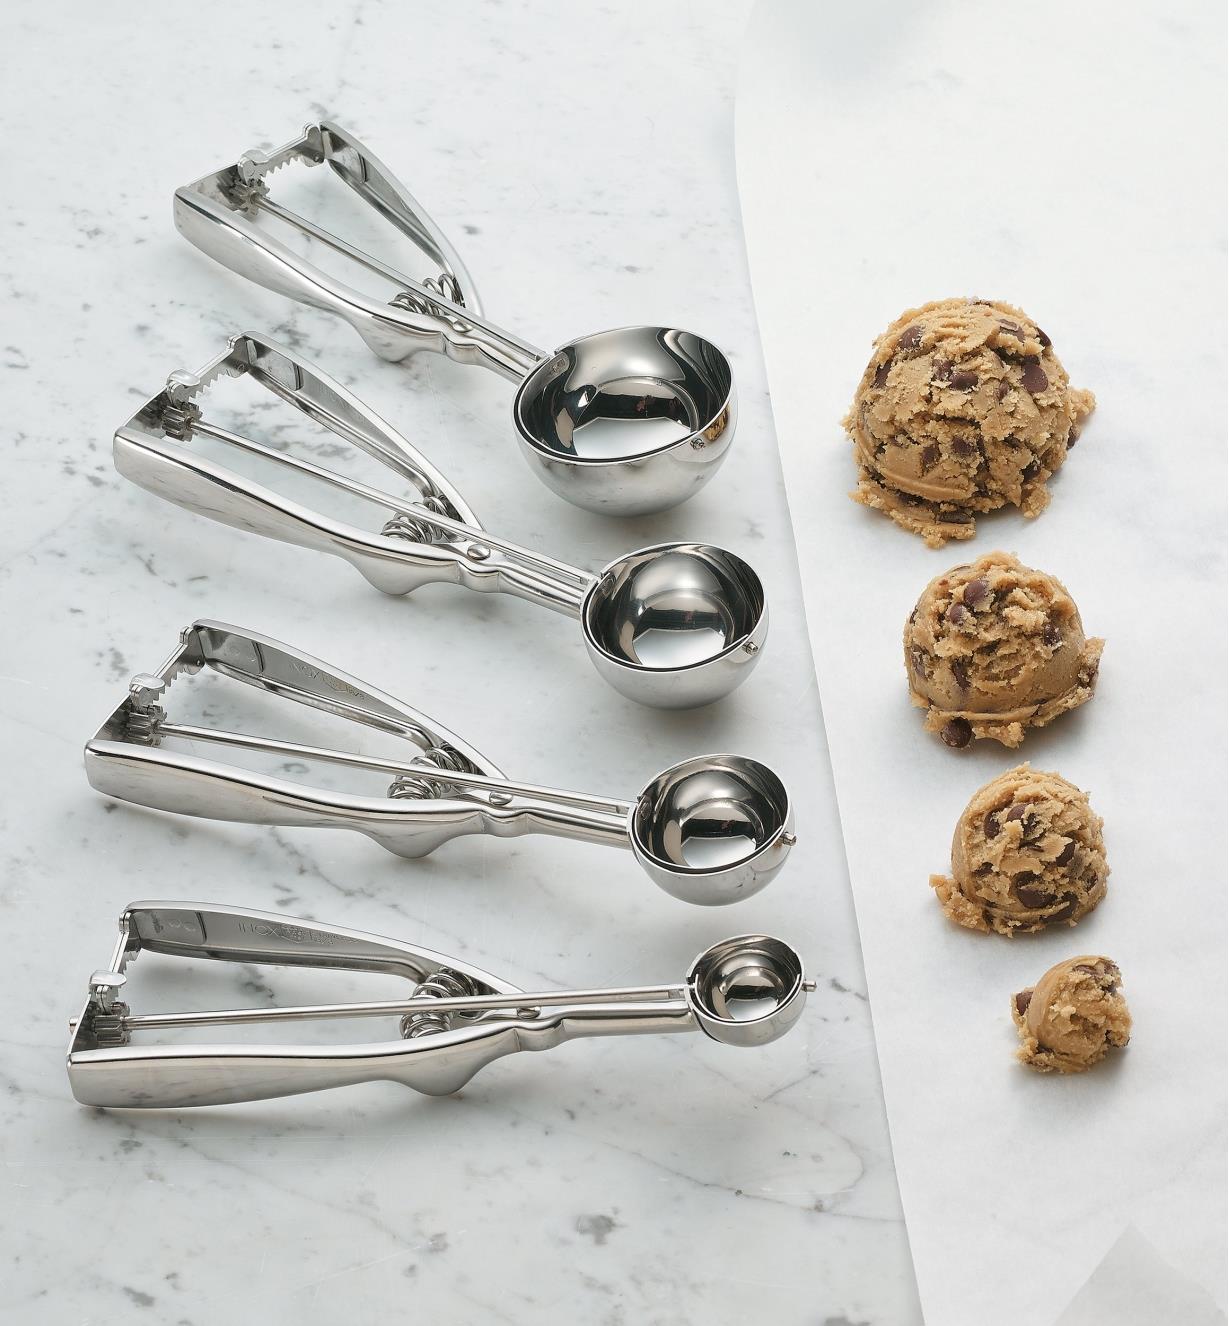 https://assets.leevalley.com/Size4/10052/73524-cookie-scoops-i-01.jpg